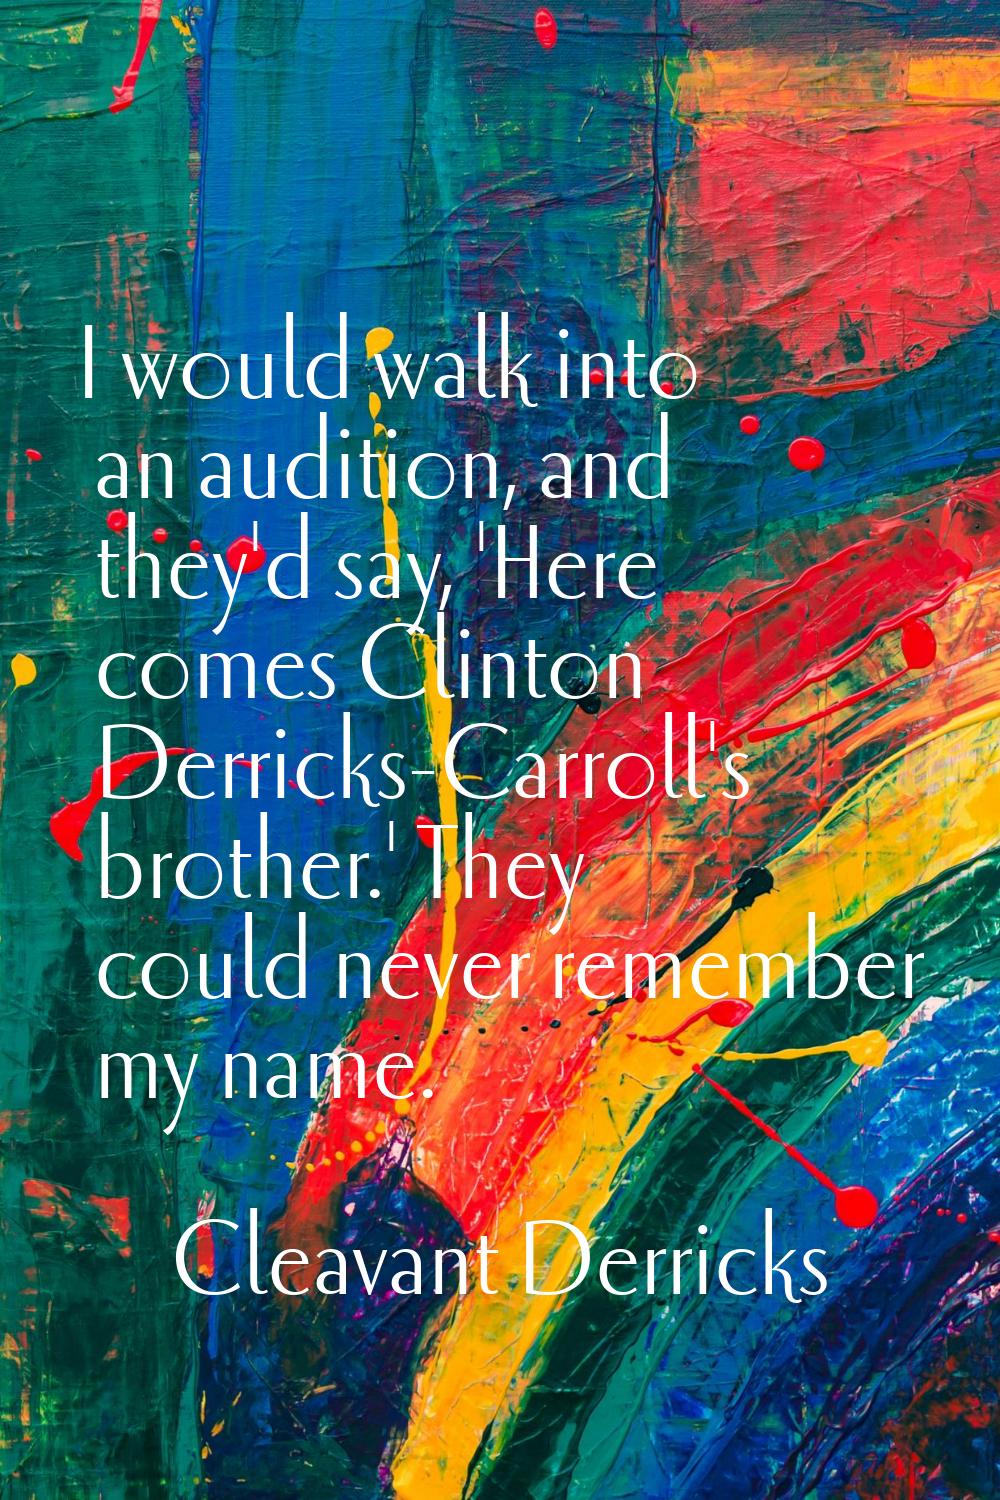 I would walk into an audition, and they'd say, 'Here comes Clinton Derricks-Carroll's brother.' The